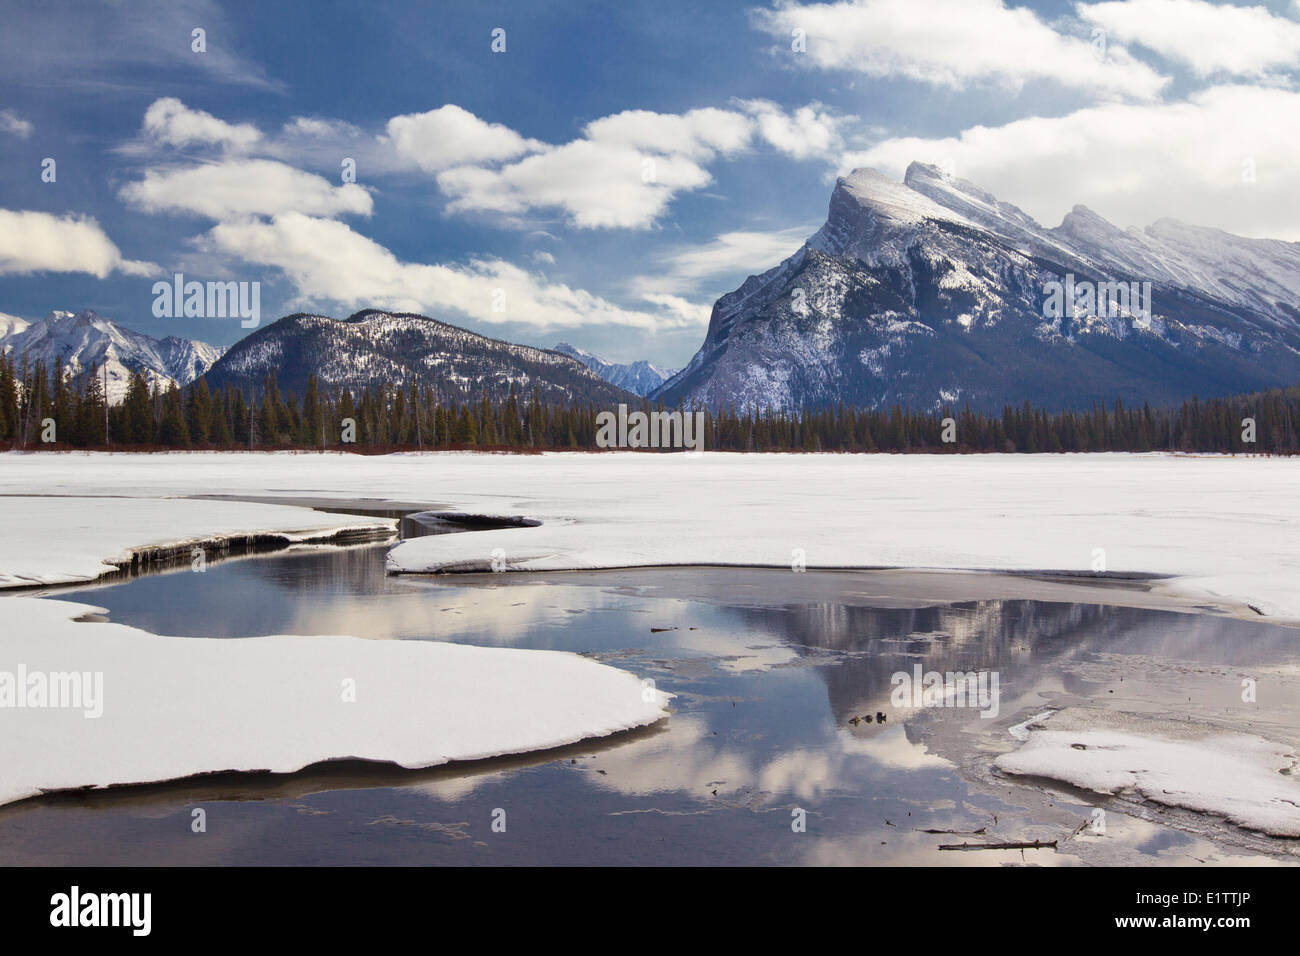 Mount Rundle and Vermilion Lakes in winter, Banff National Park, Alberta, Canada Stock Photo